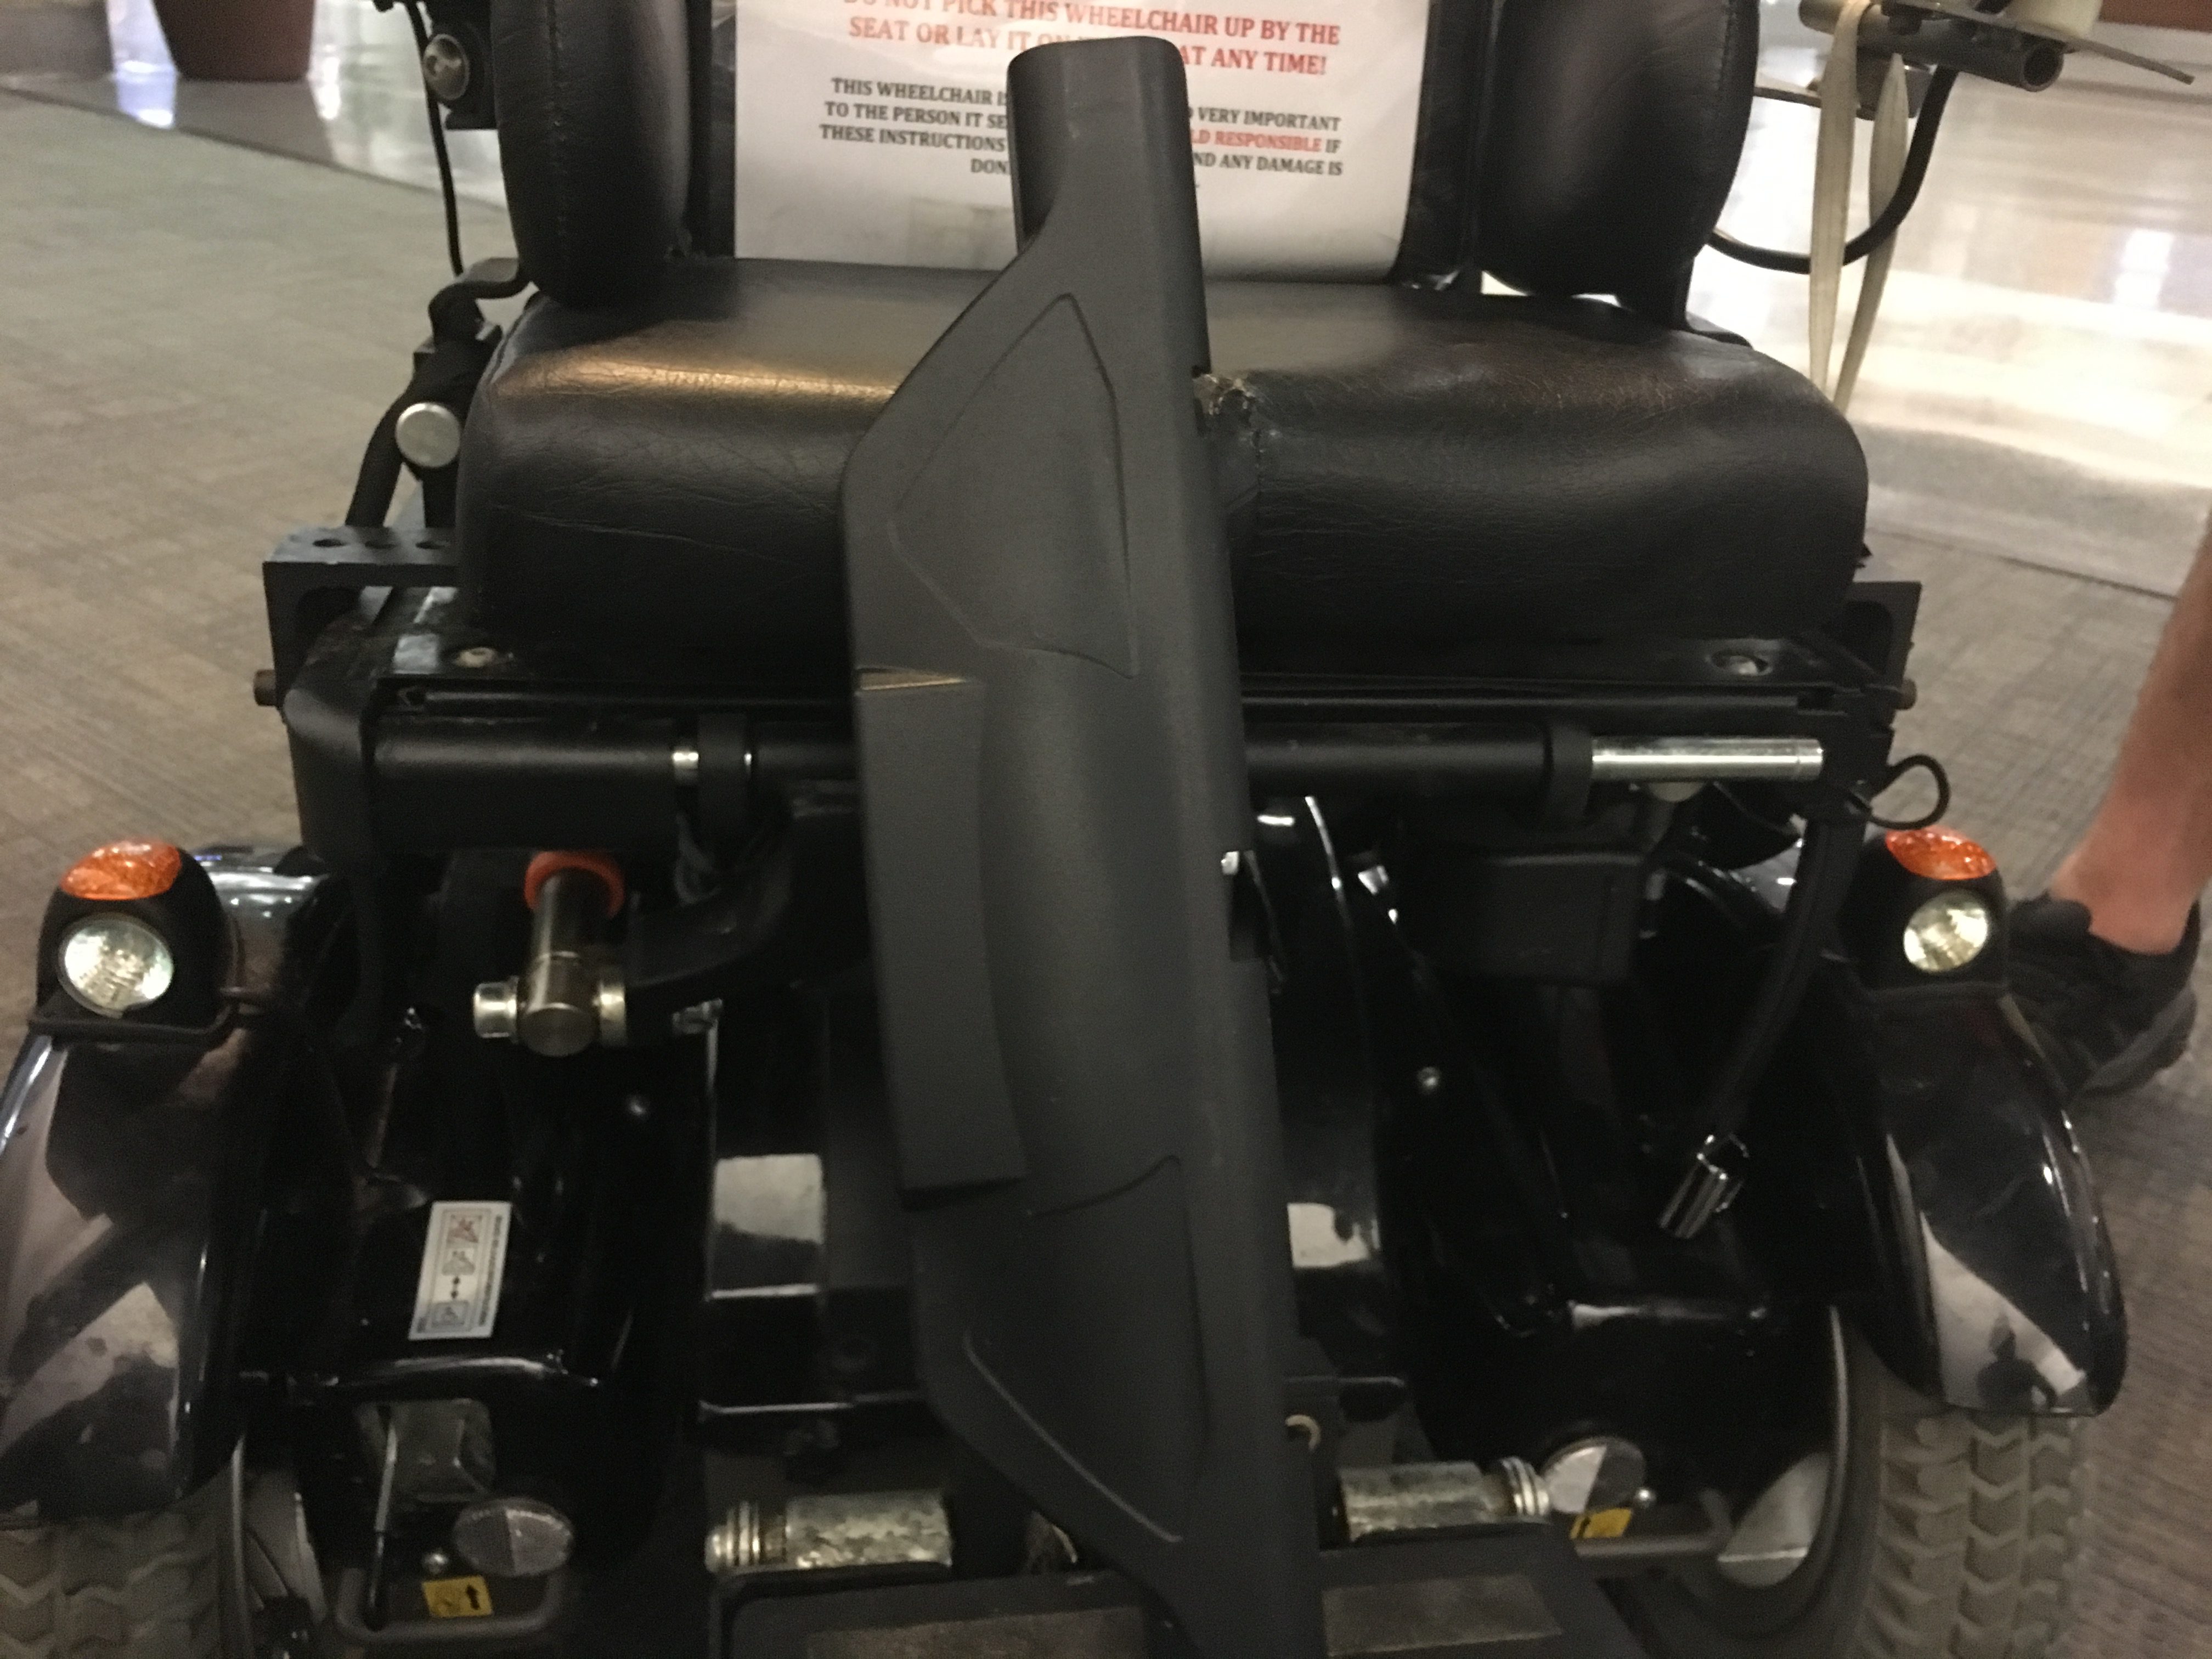 damage to wheelchair from flying